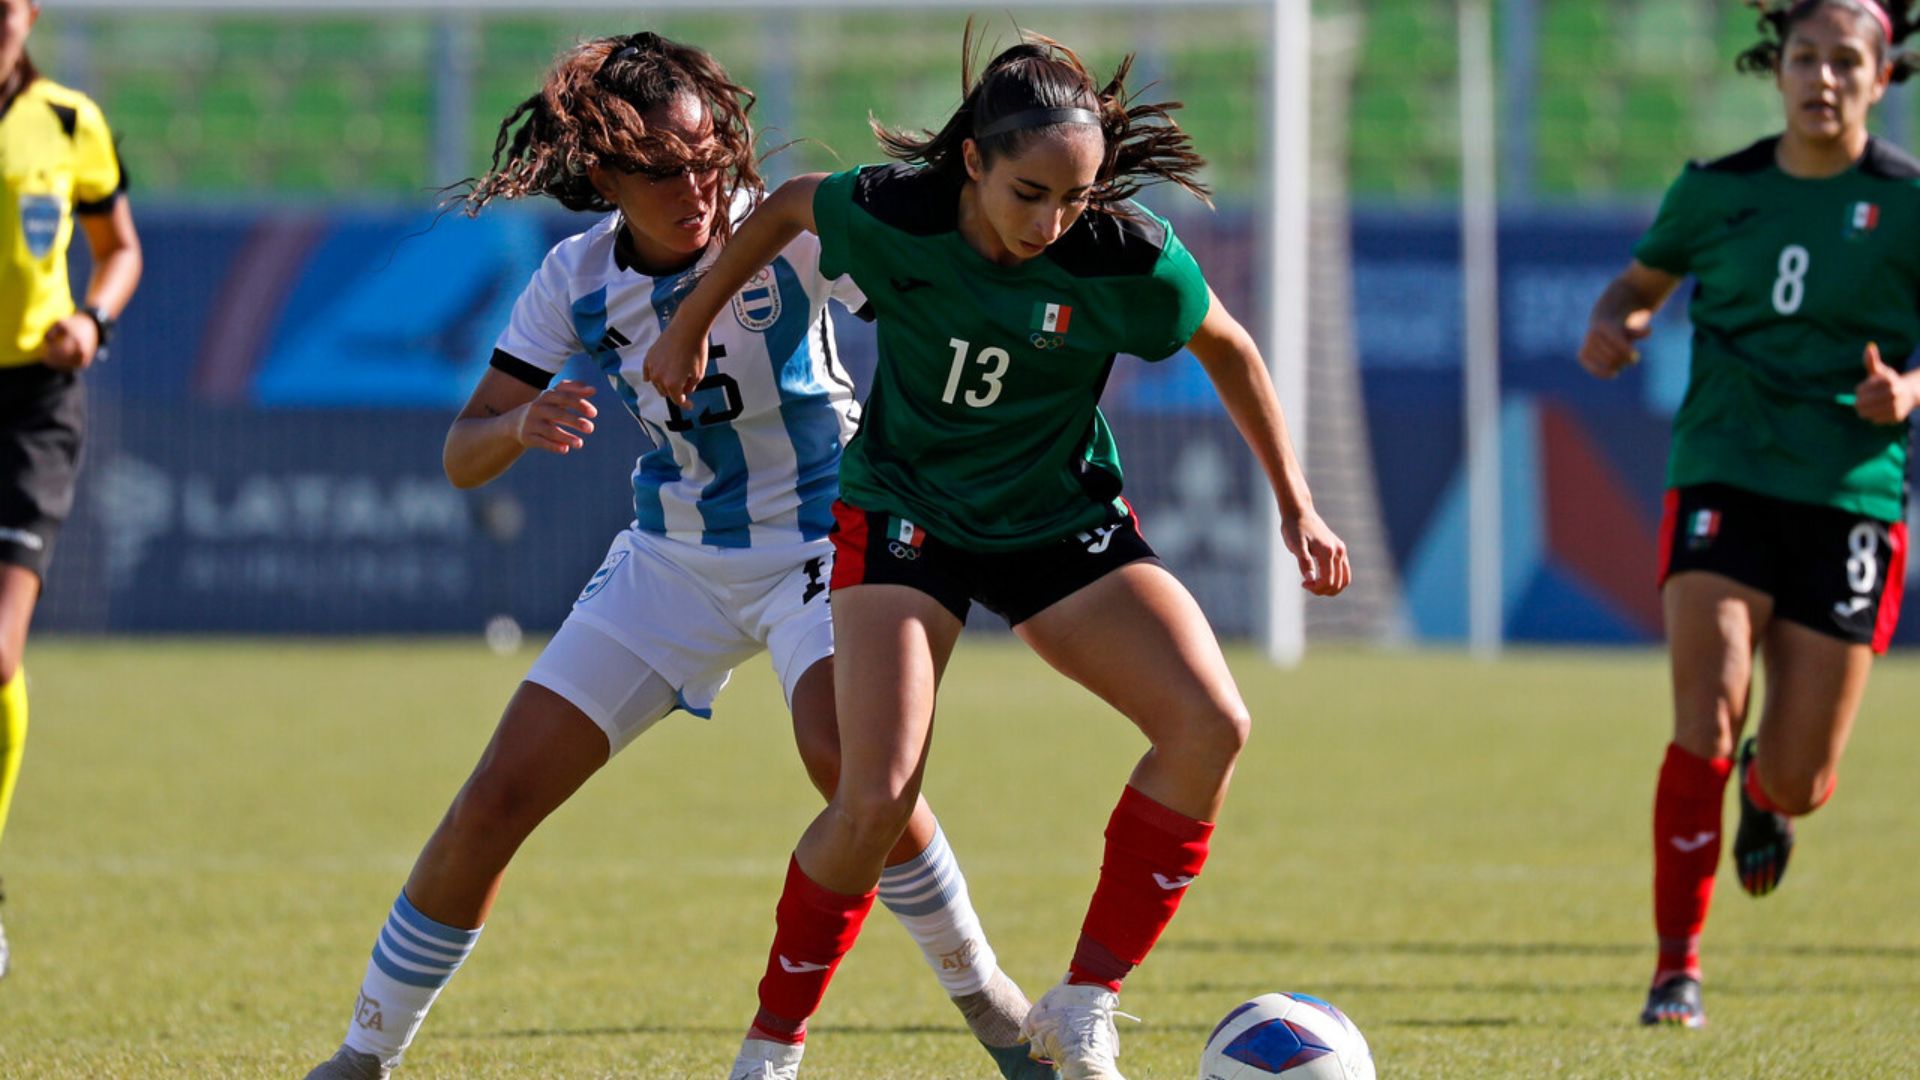 Mexico defeats Argentina, advances to gold medal match in female's football